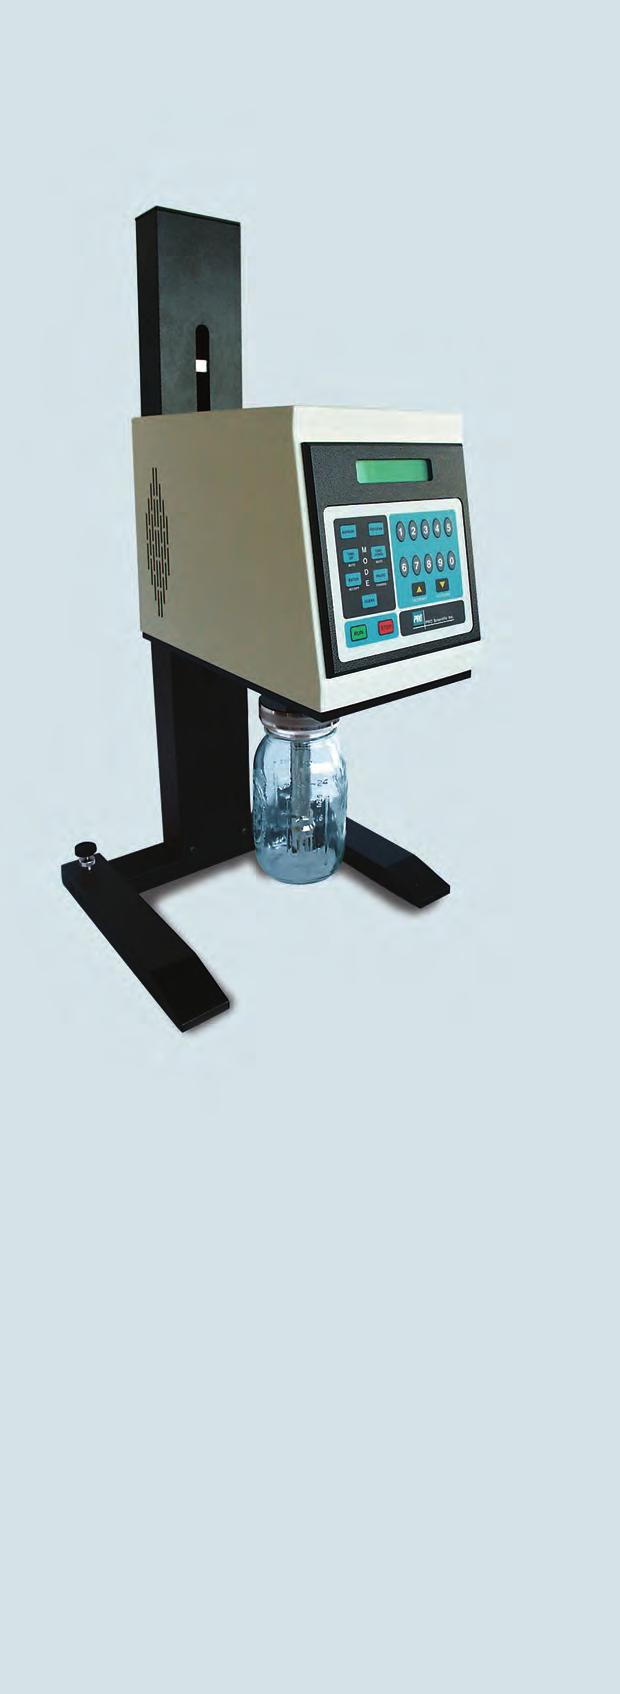 Homogenizers from PRO Scientific PRO PC-Series Most versatile and affordable, high-torque, programmable homogenizers available PRO PC-Series Programmable Laboratory and Industrial Homogenizers